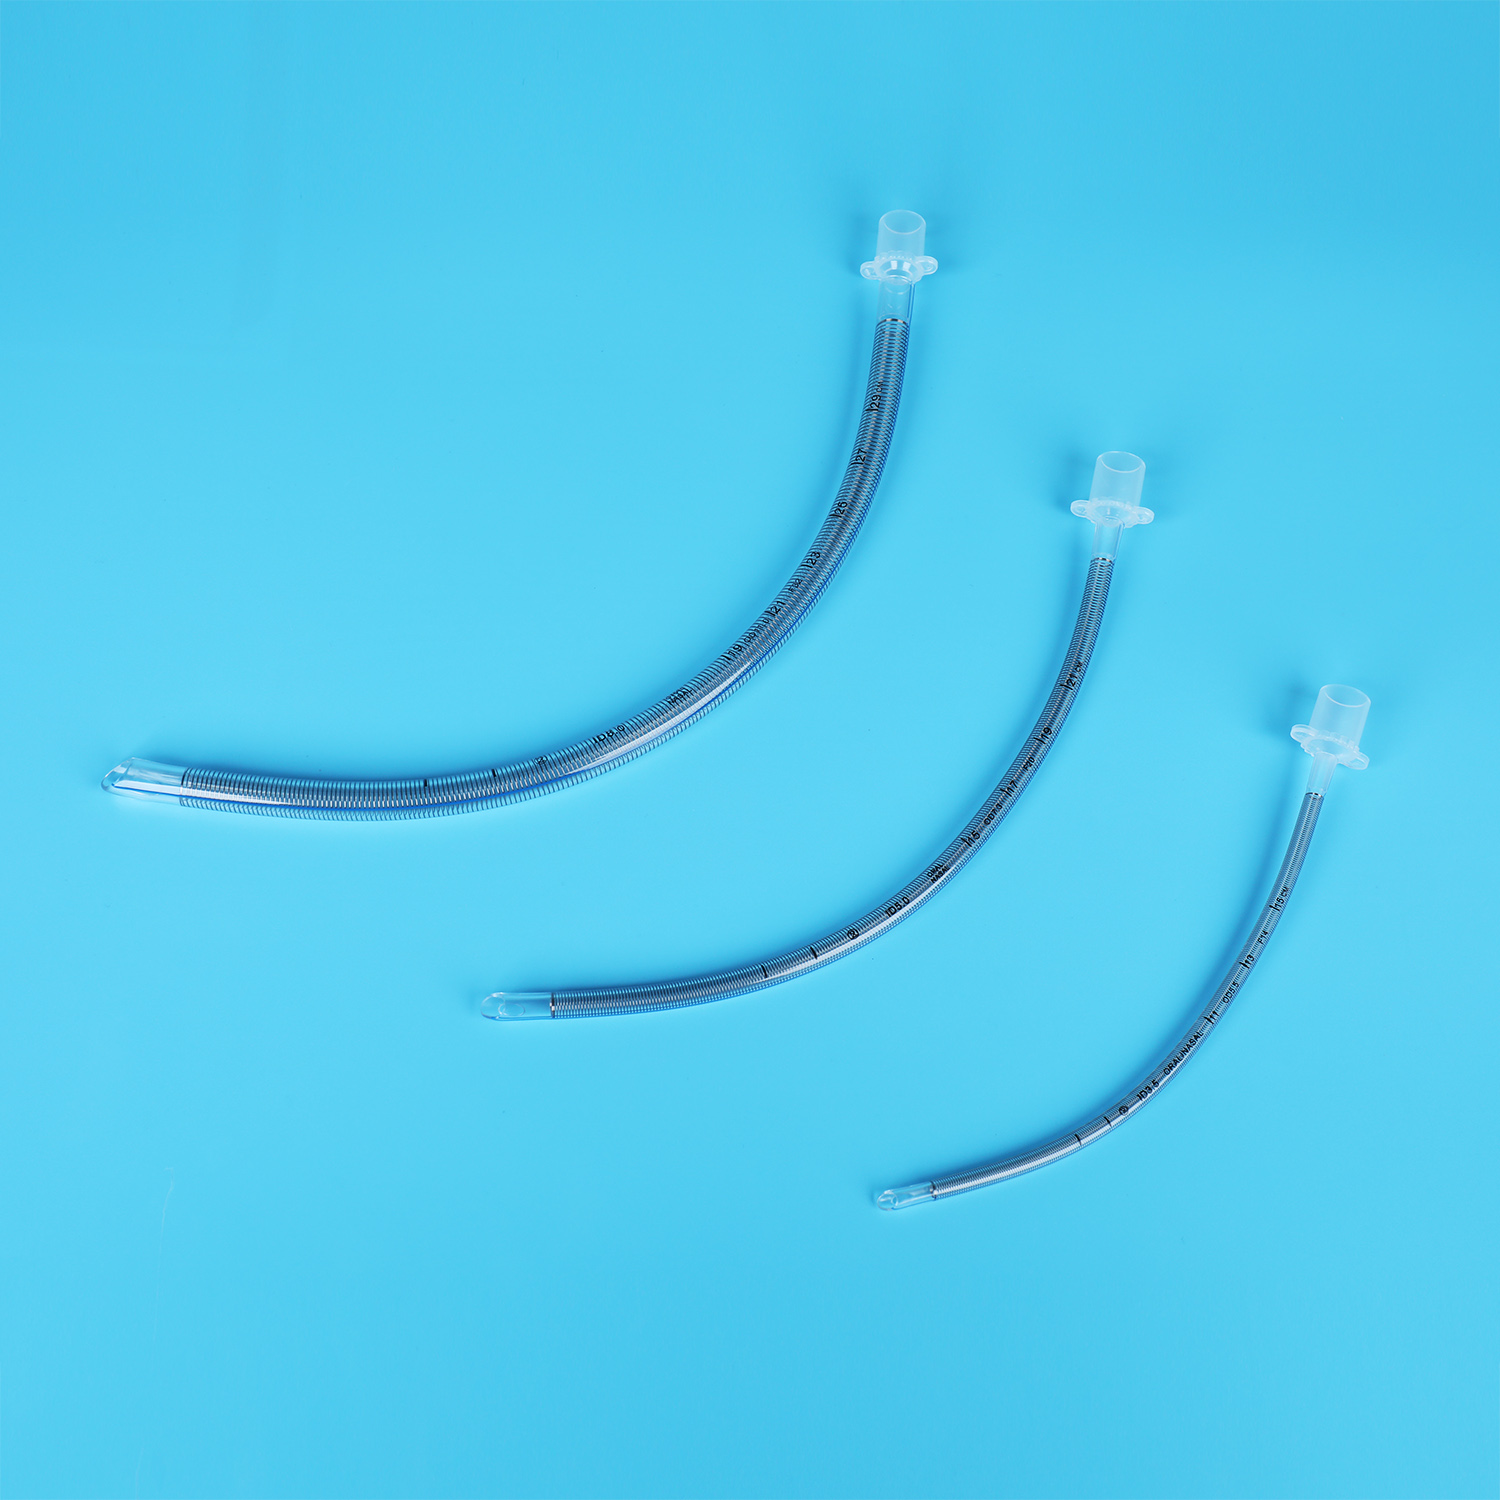 China Armored Reinforced Endotracheal Tube Flexable Soft Tip Uncuff Factory Direct Supply Whole Sale China Profile Cuff Tracheal Catheter Oxygen Tube